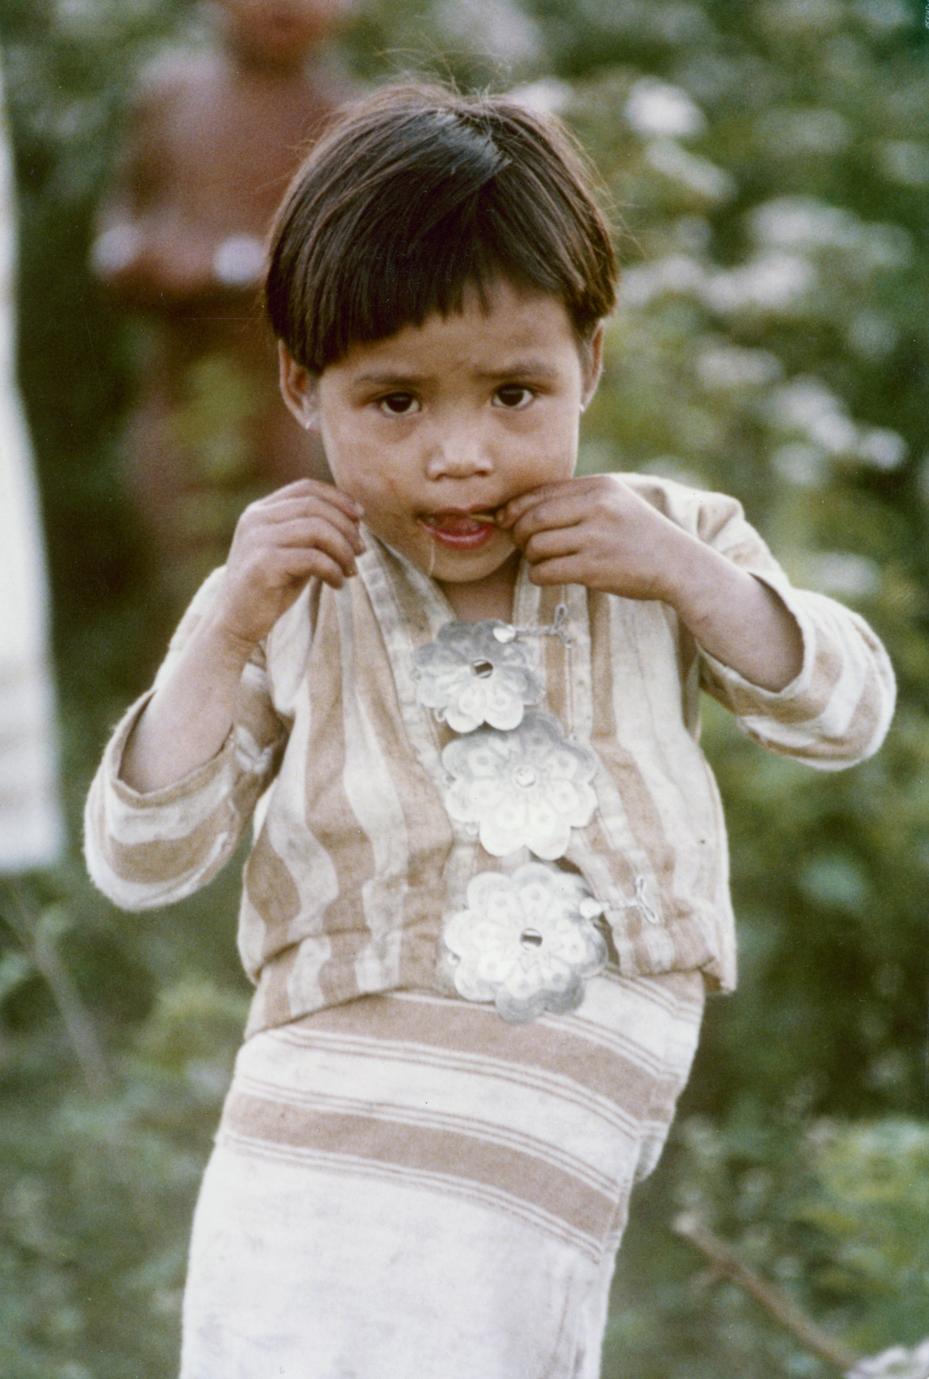 White Lahu (Lahu Hpu) child in the village of Chalopha in Houa Khong Province.